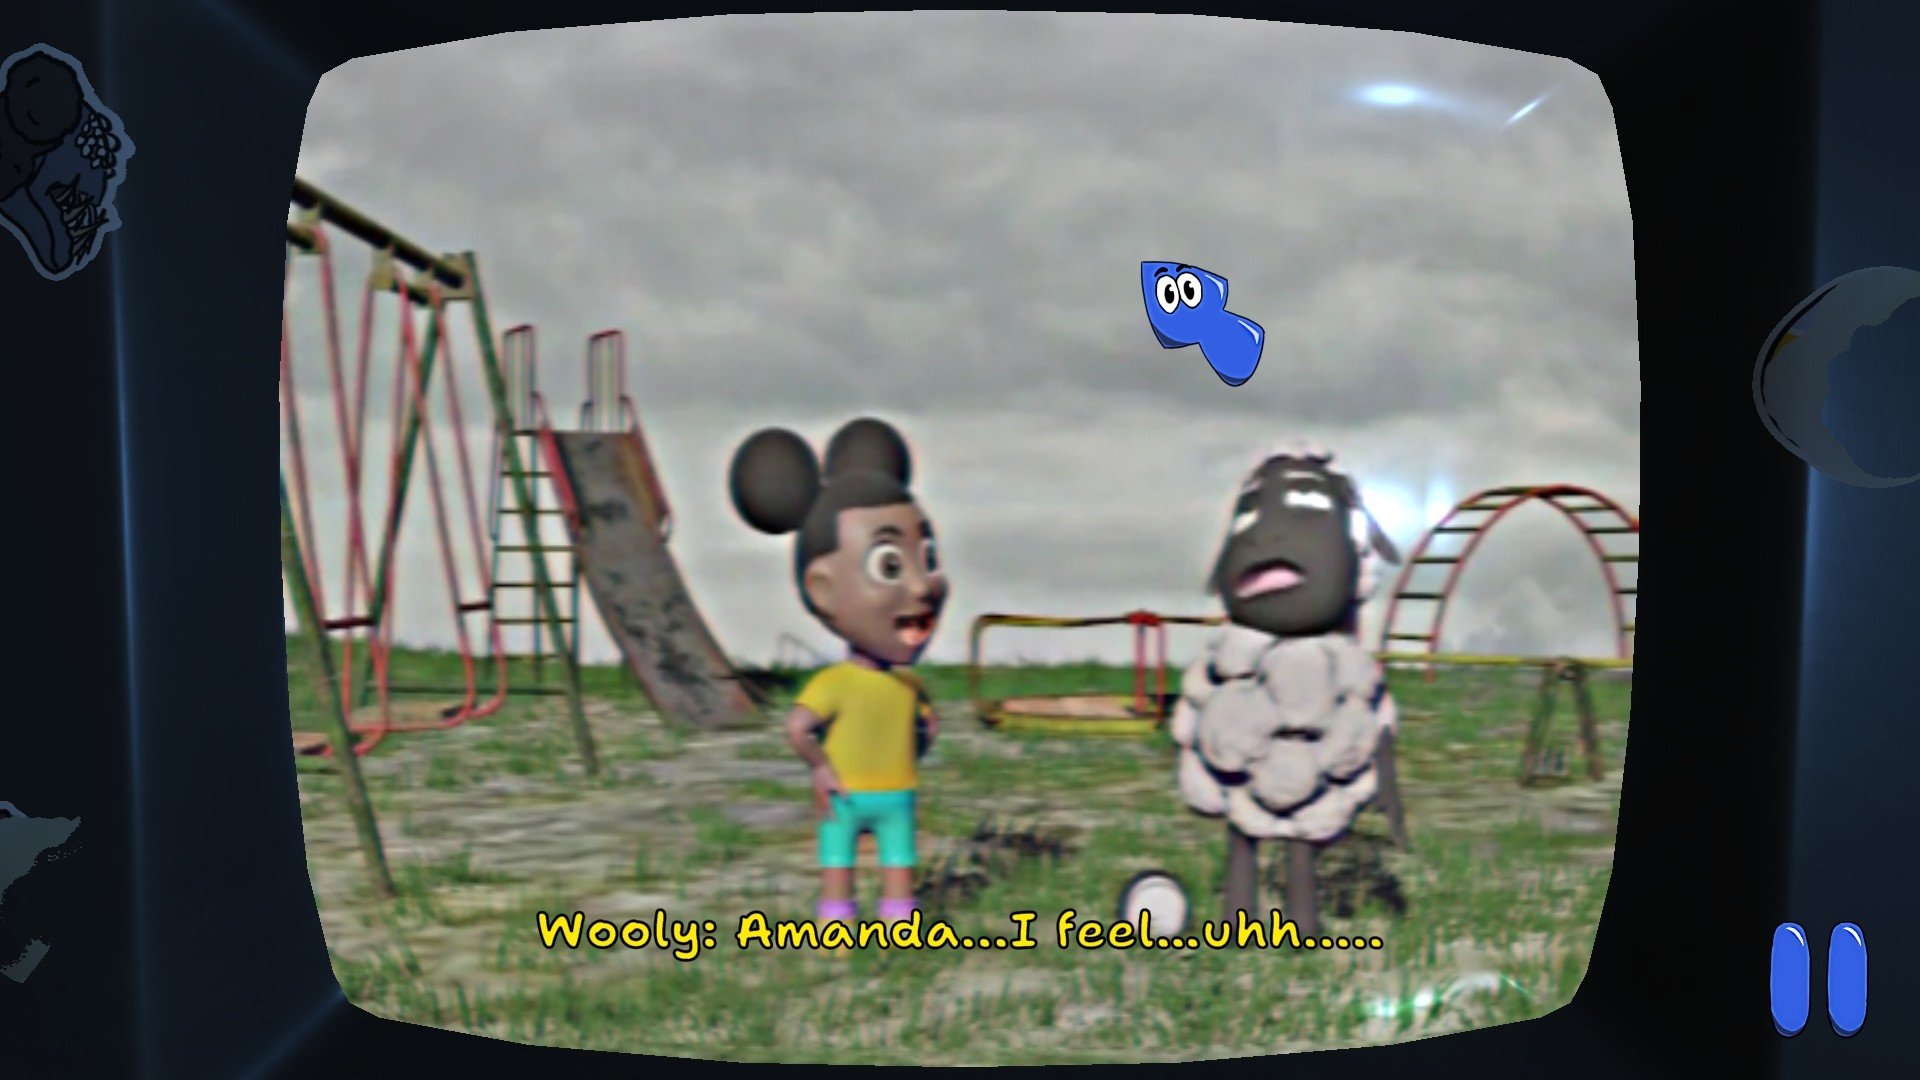 game screenshot showing a CRT screen with two CGI character on it. One is a little girl and the other is an anthropomorphic sheep. The sheep looks woozy, and the subtitles read "Wooly: Amanda... I feel...uhh..."